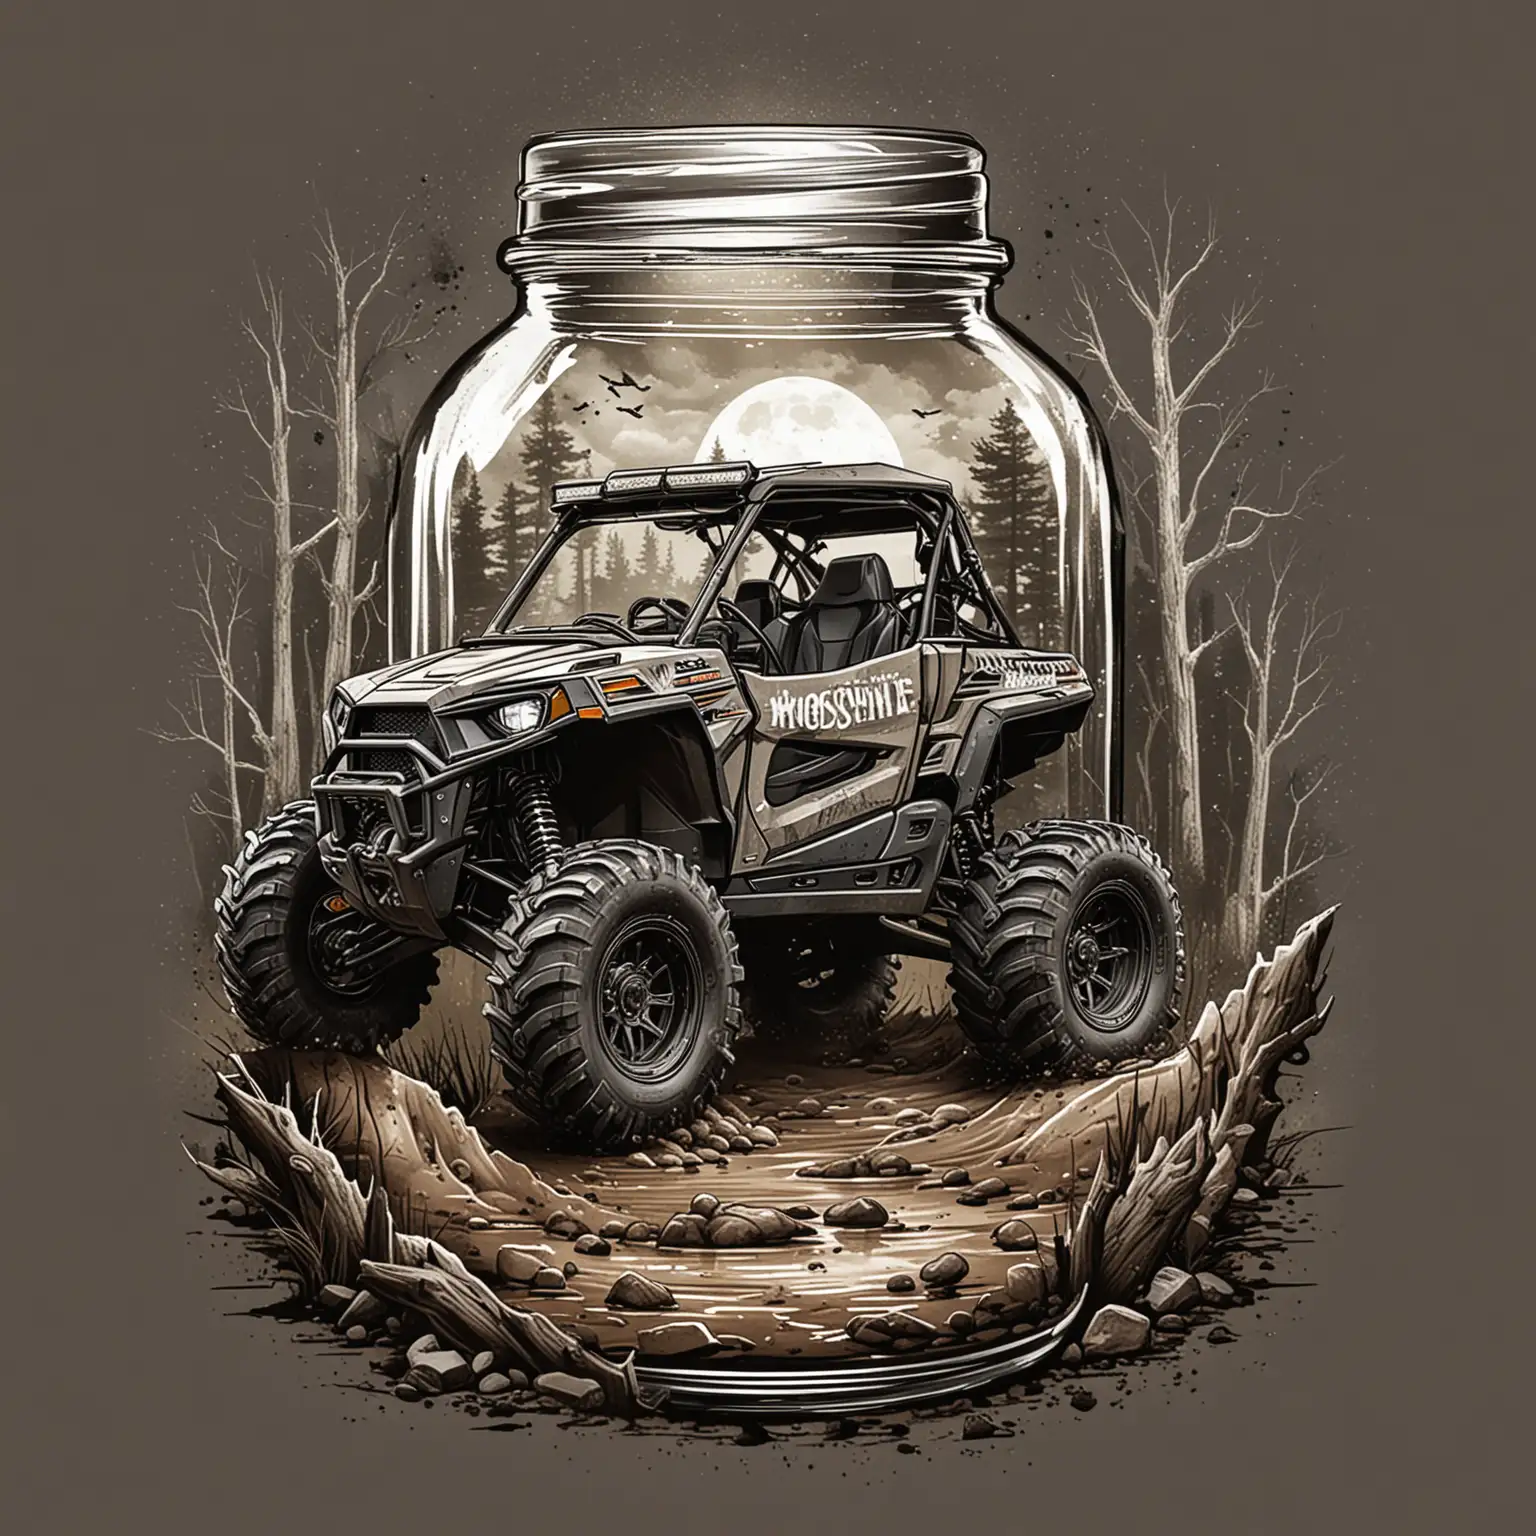 Shirt Design of a Moonshine jar with a rzr side by side going thru the mud and in the jar have it say " Get Your Ride On"